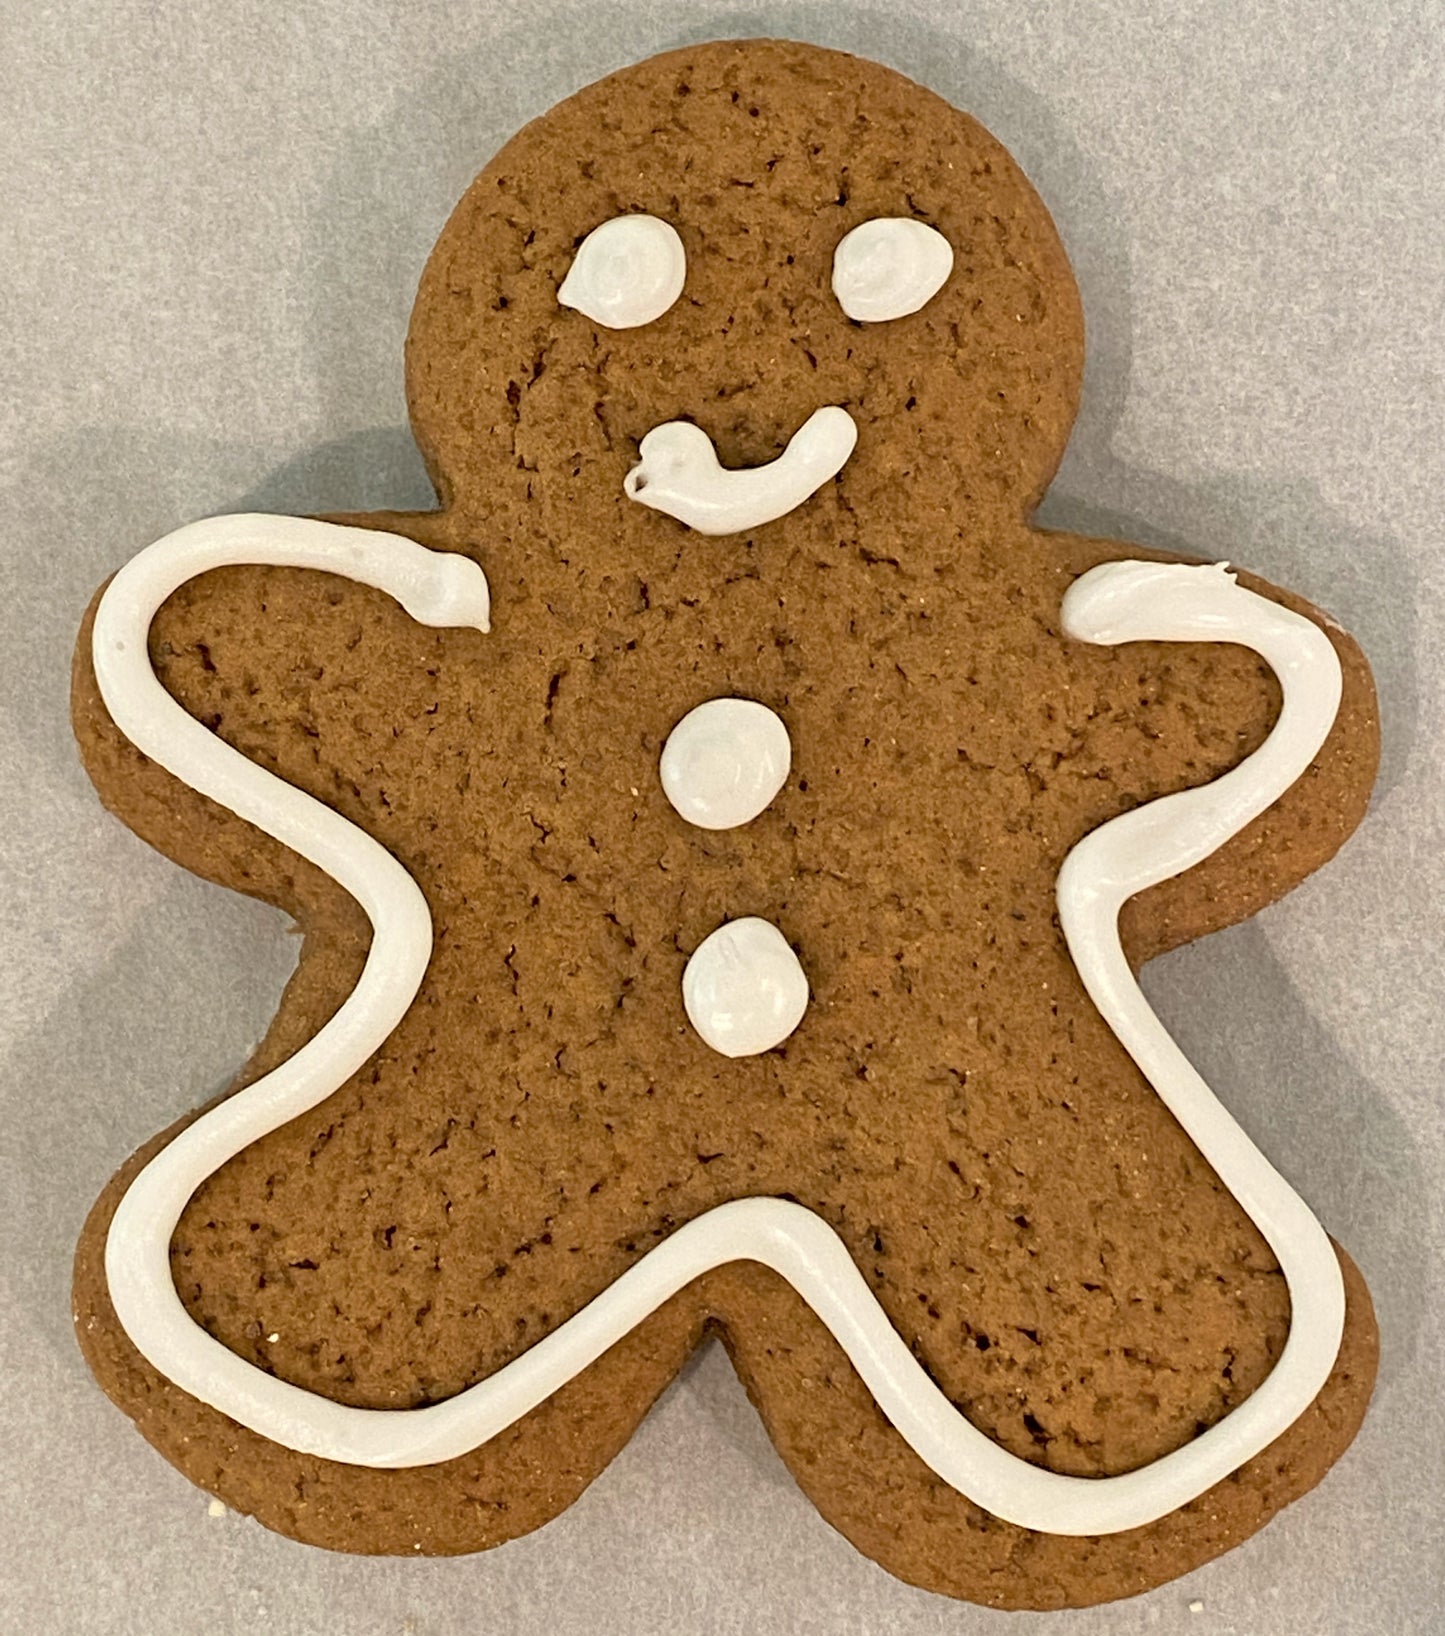 Gingerbread Cookie Mix *SPECIAL PRICE*